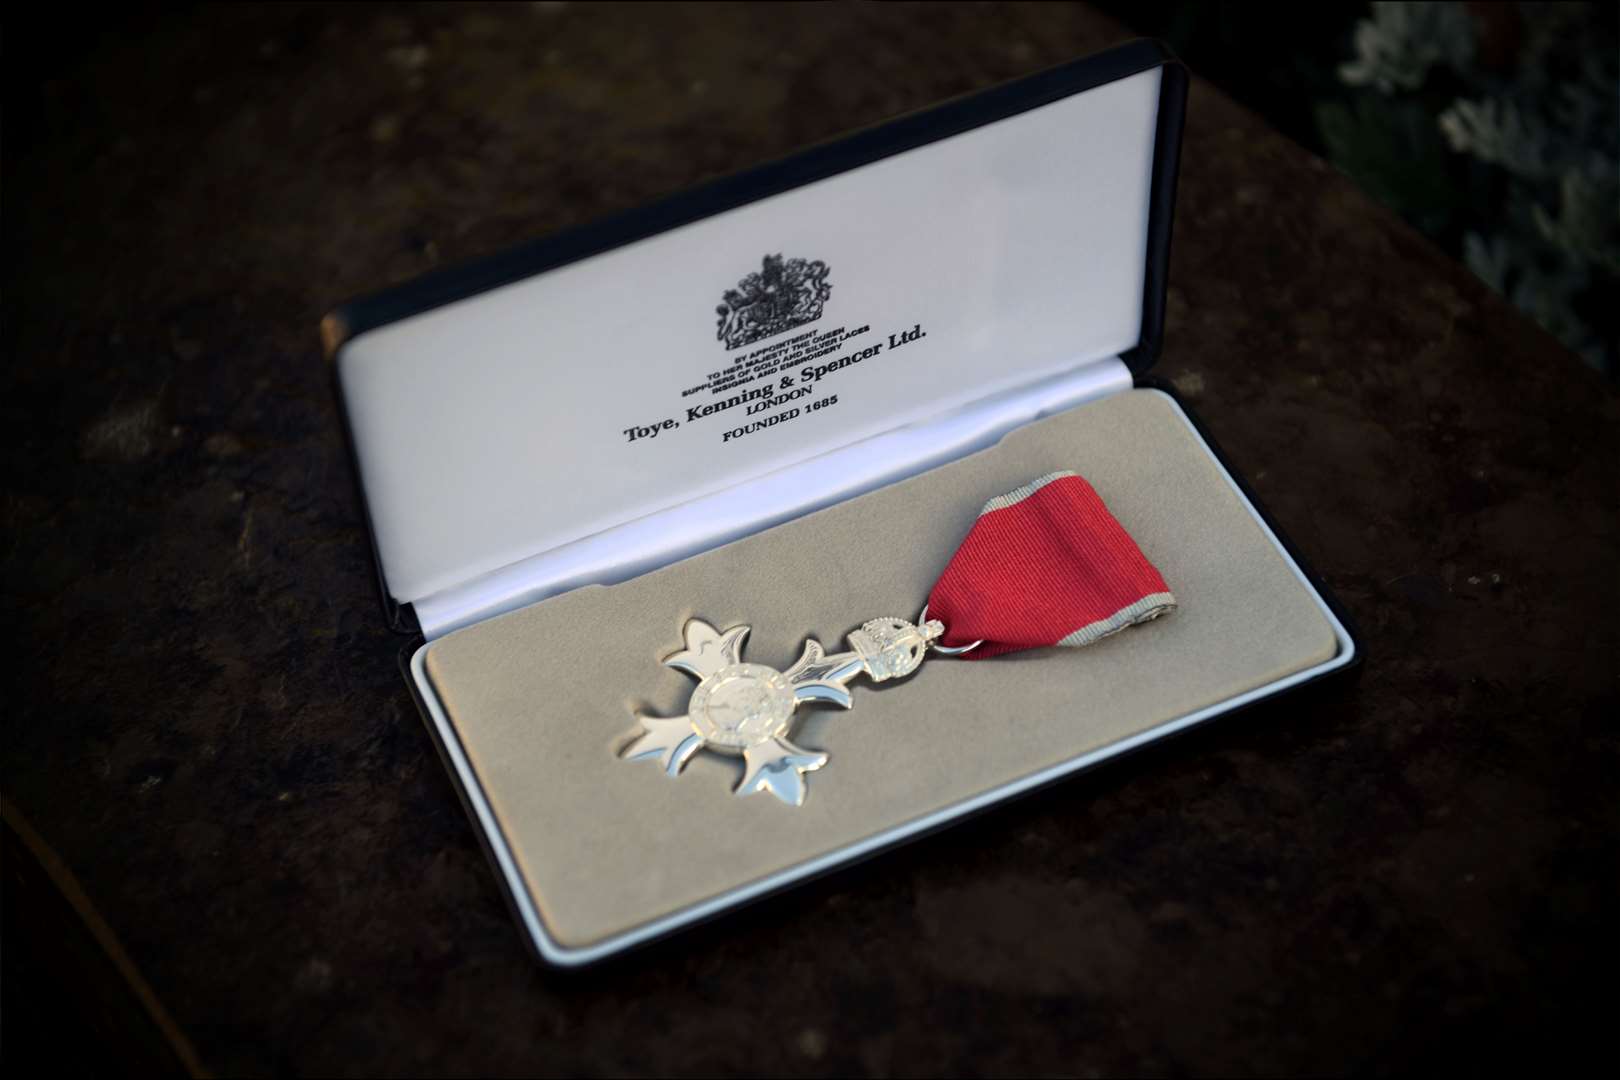 The medal in its box.